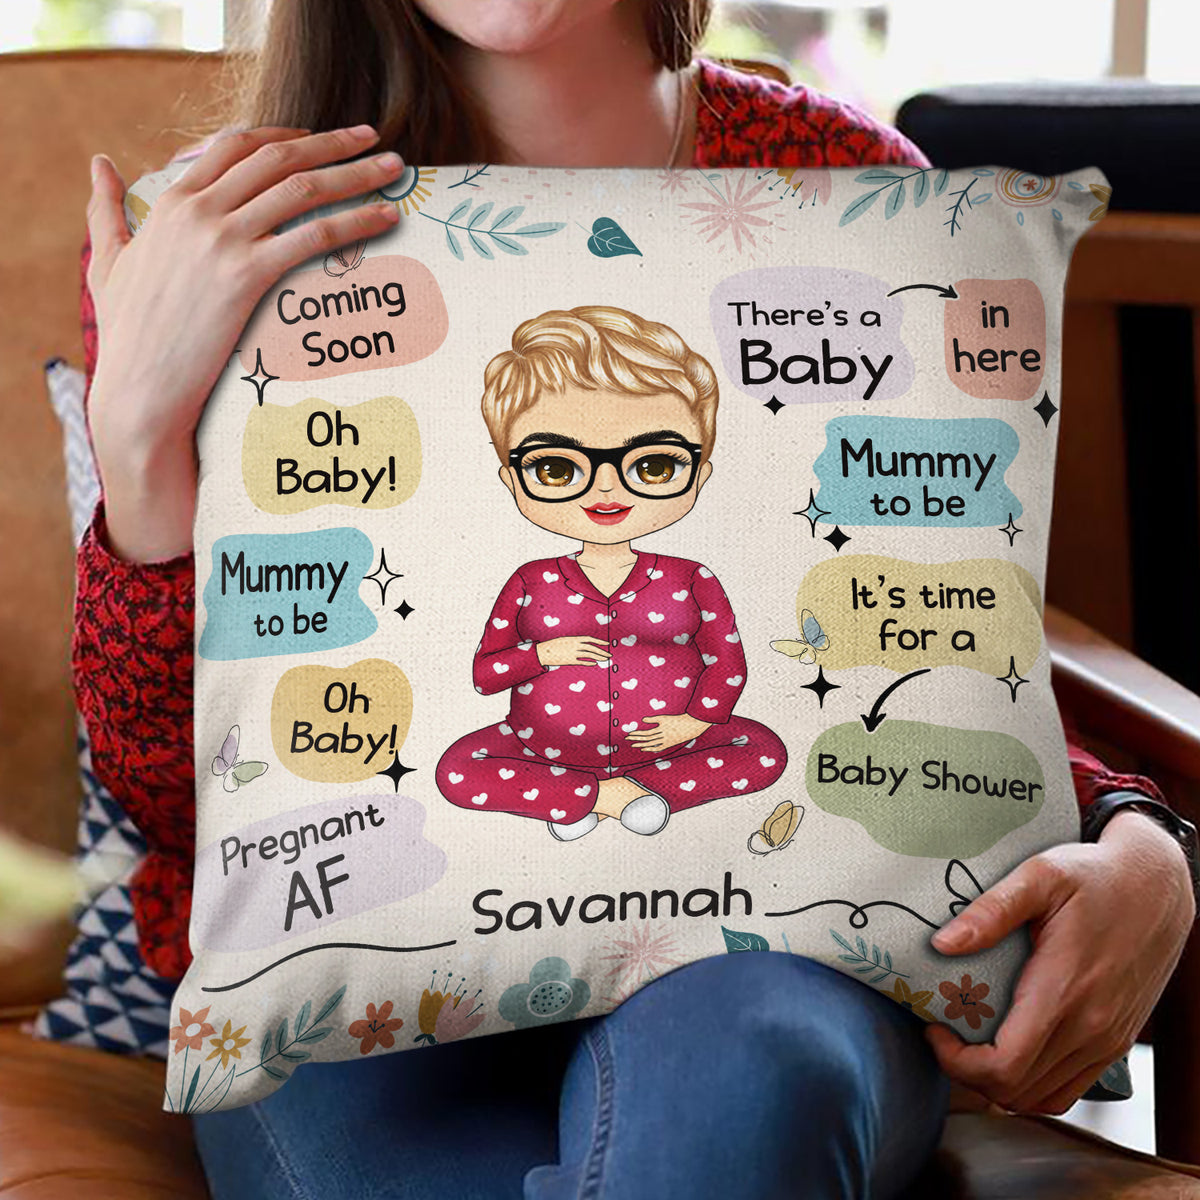 Pregnant Mom To Be - Pregnancy Gift For Mother - Personalized Pillow